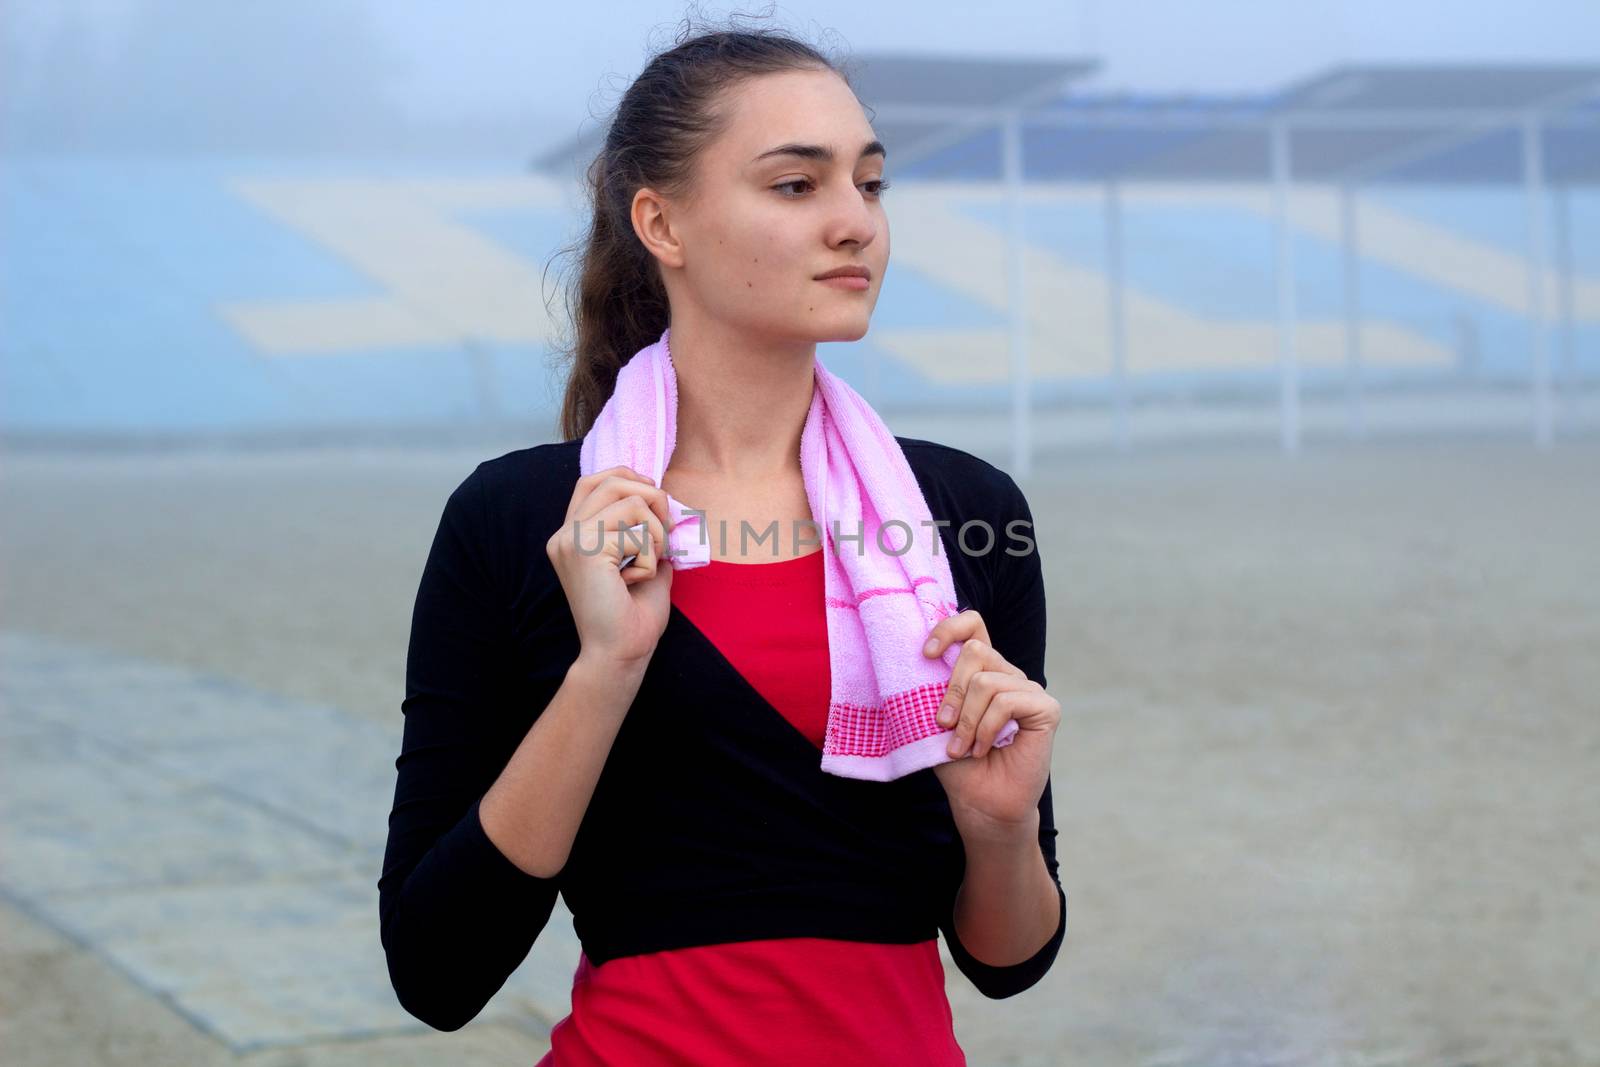 Young pretty slim fitness sporty woman with towel during break at training workout outdoor